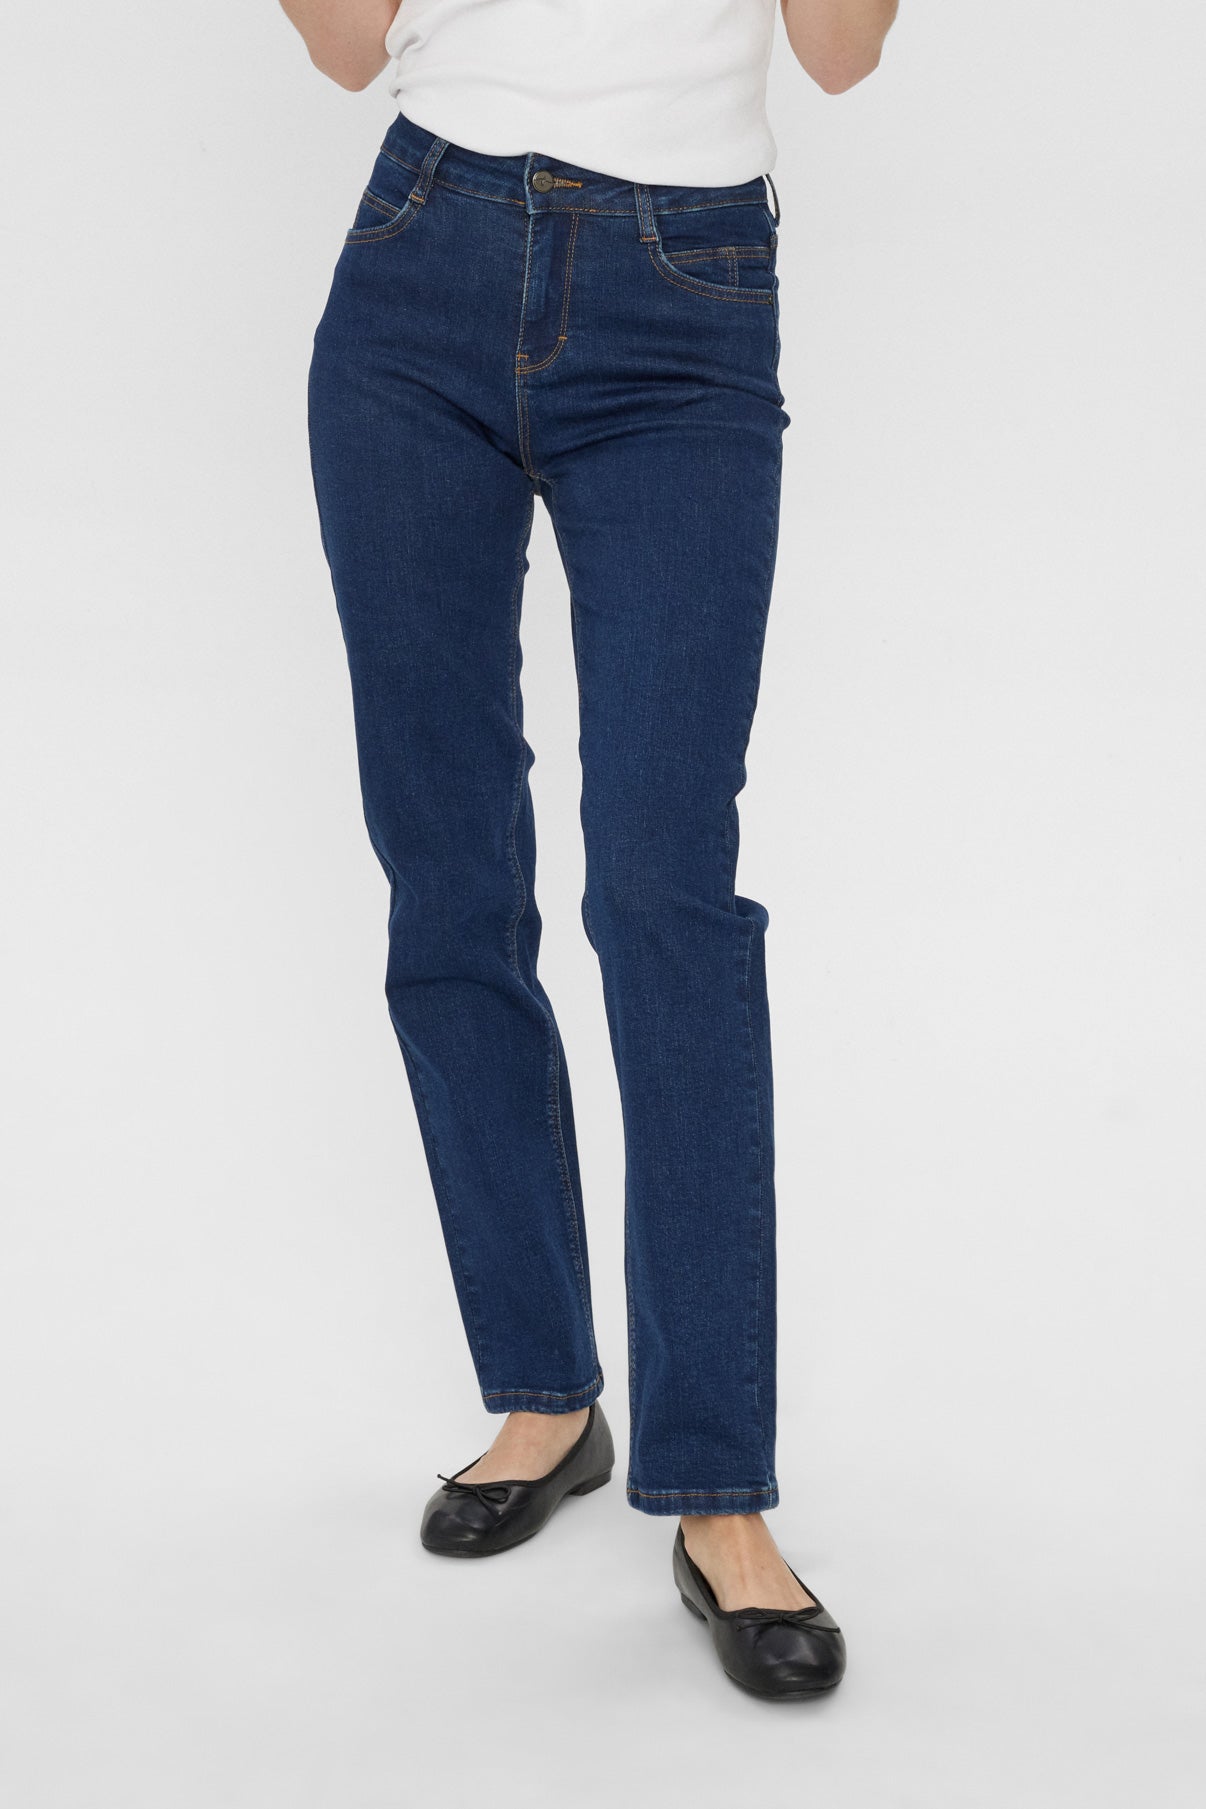 THERESE Jeans Manett 9403